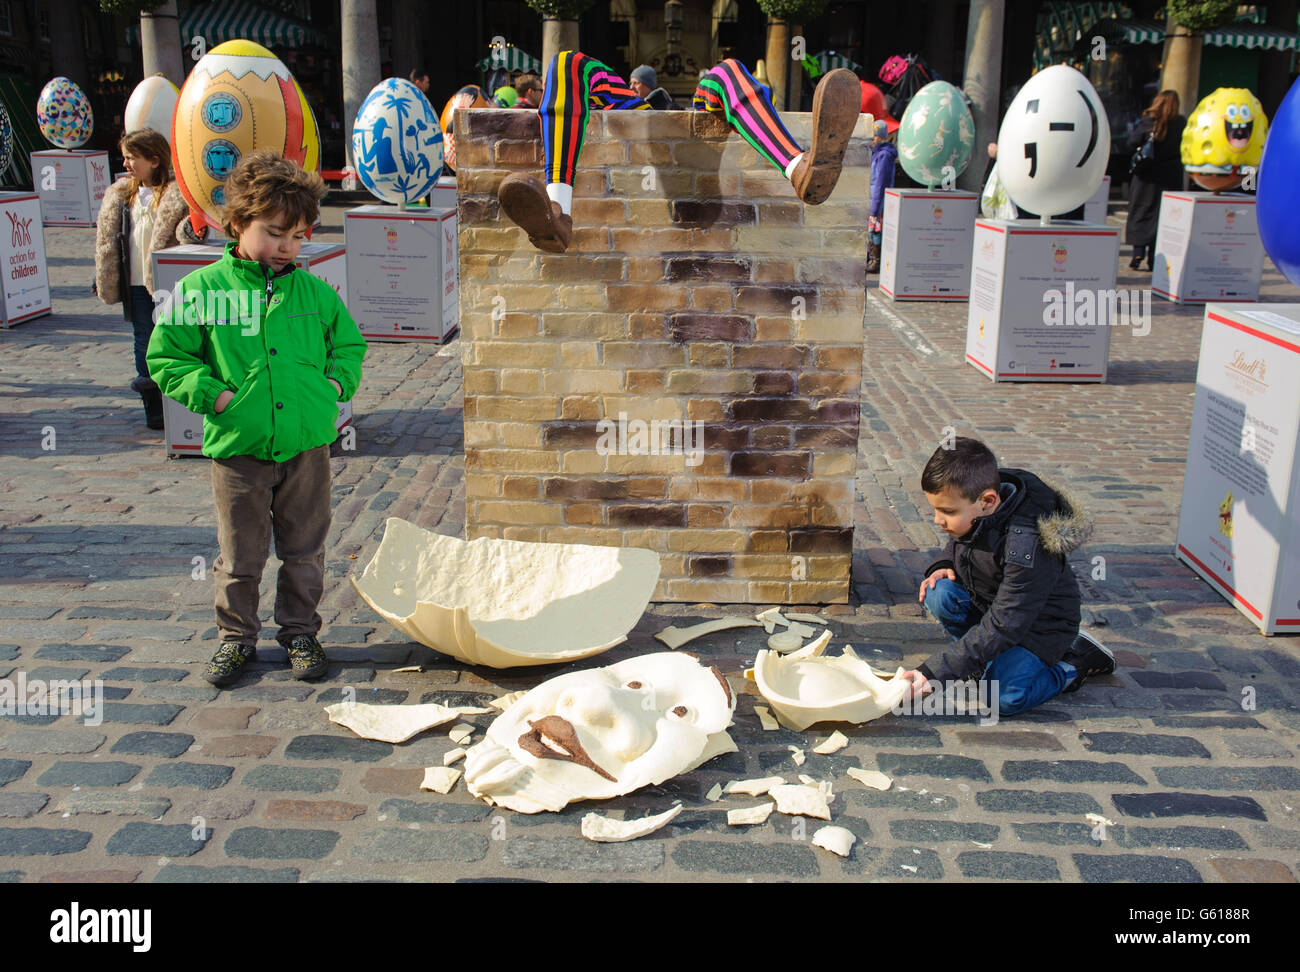 Zachary Di Palma (left) and Aman Birdy examine the remains of a shattered 4ft tall Humpty Dumpty style Easter egg in Covent Garden, central London, as part of the Lindt Big Egg Hunt supporting children's charity Action for Children. Stock Photo